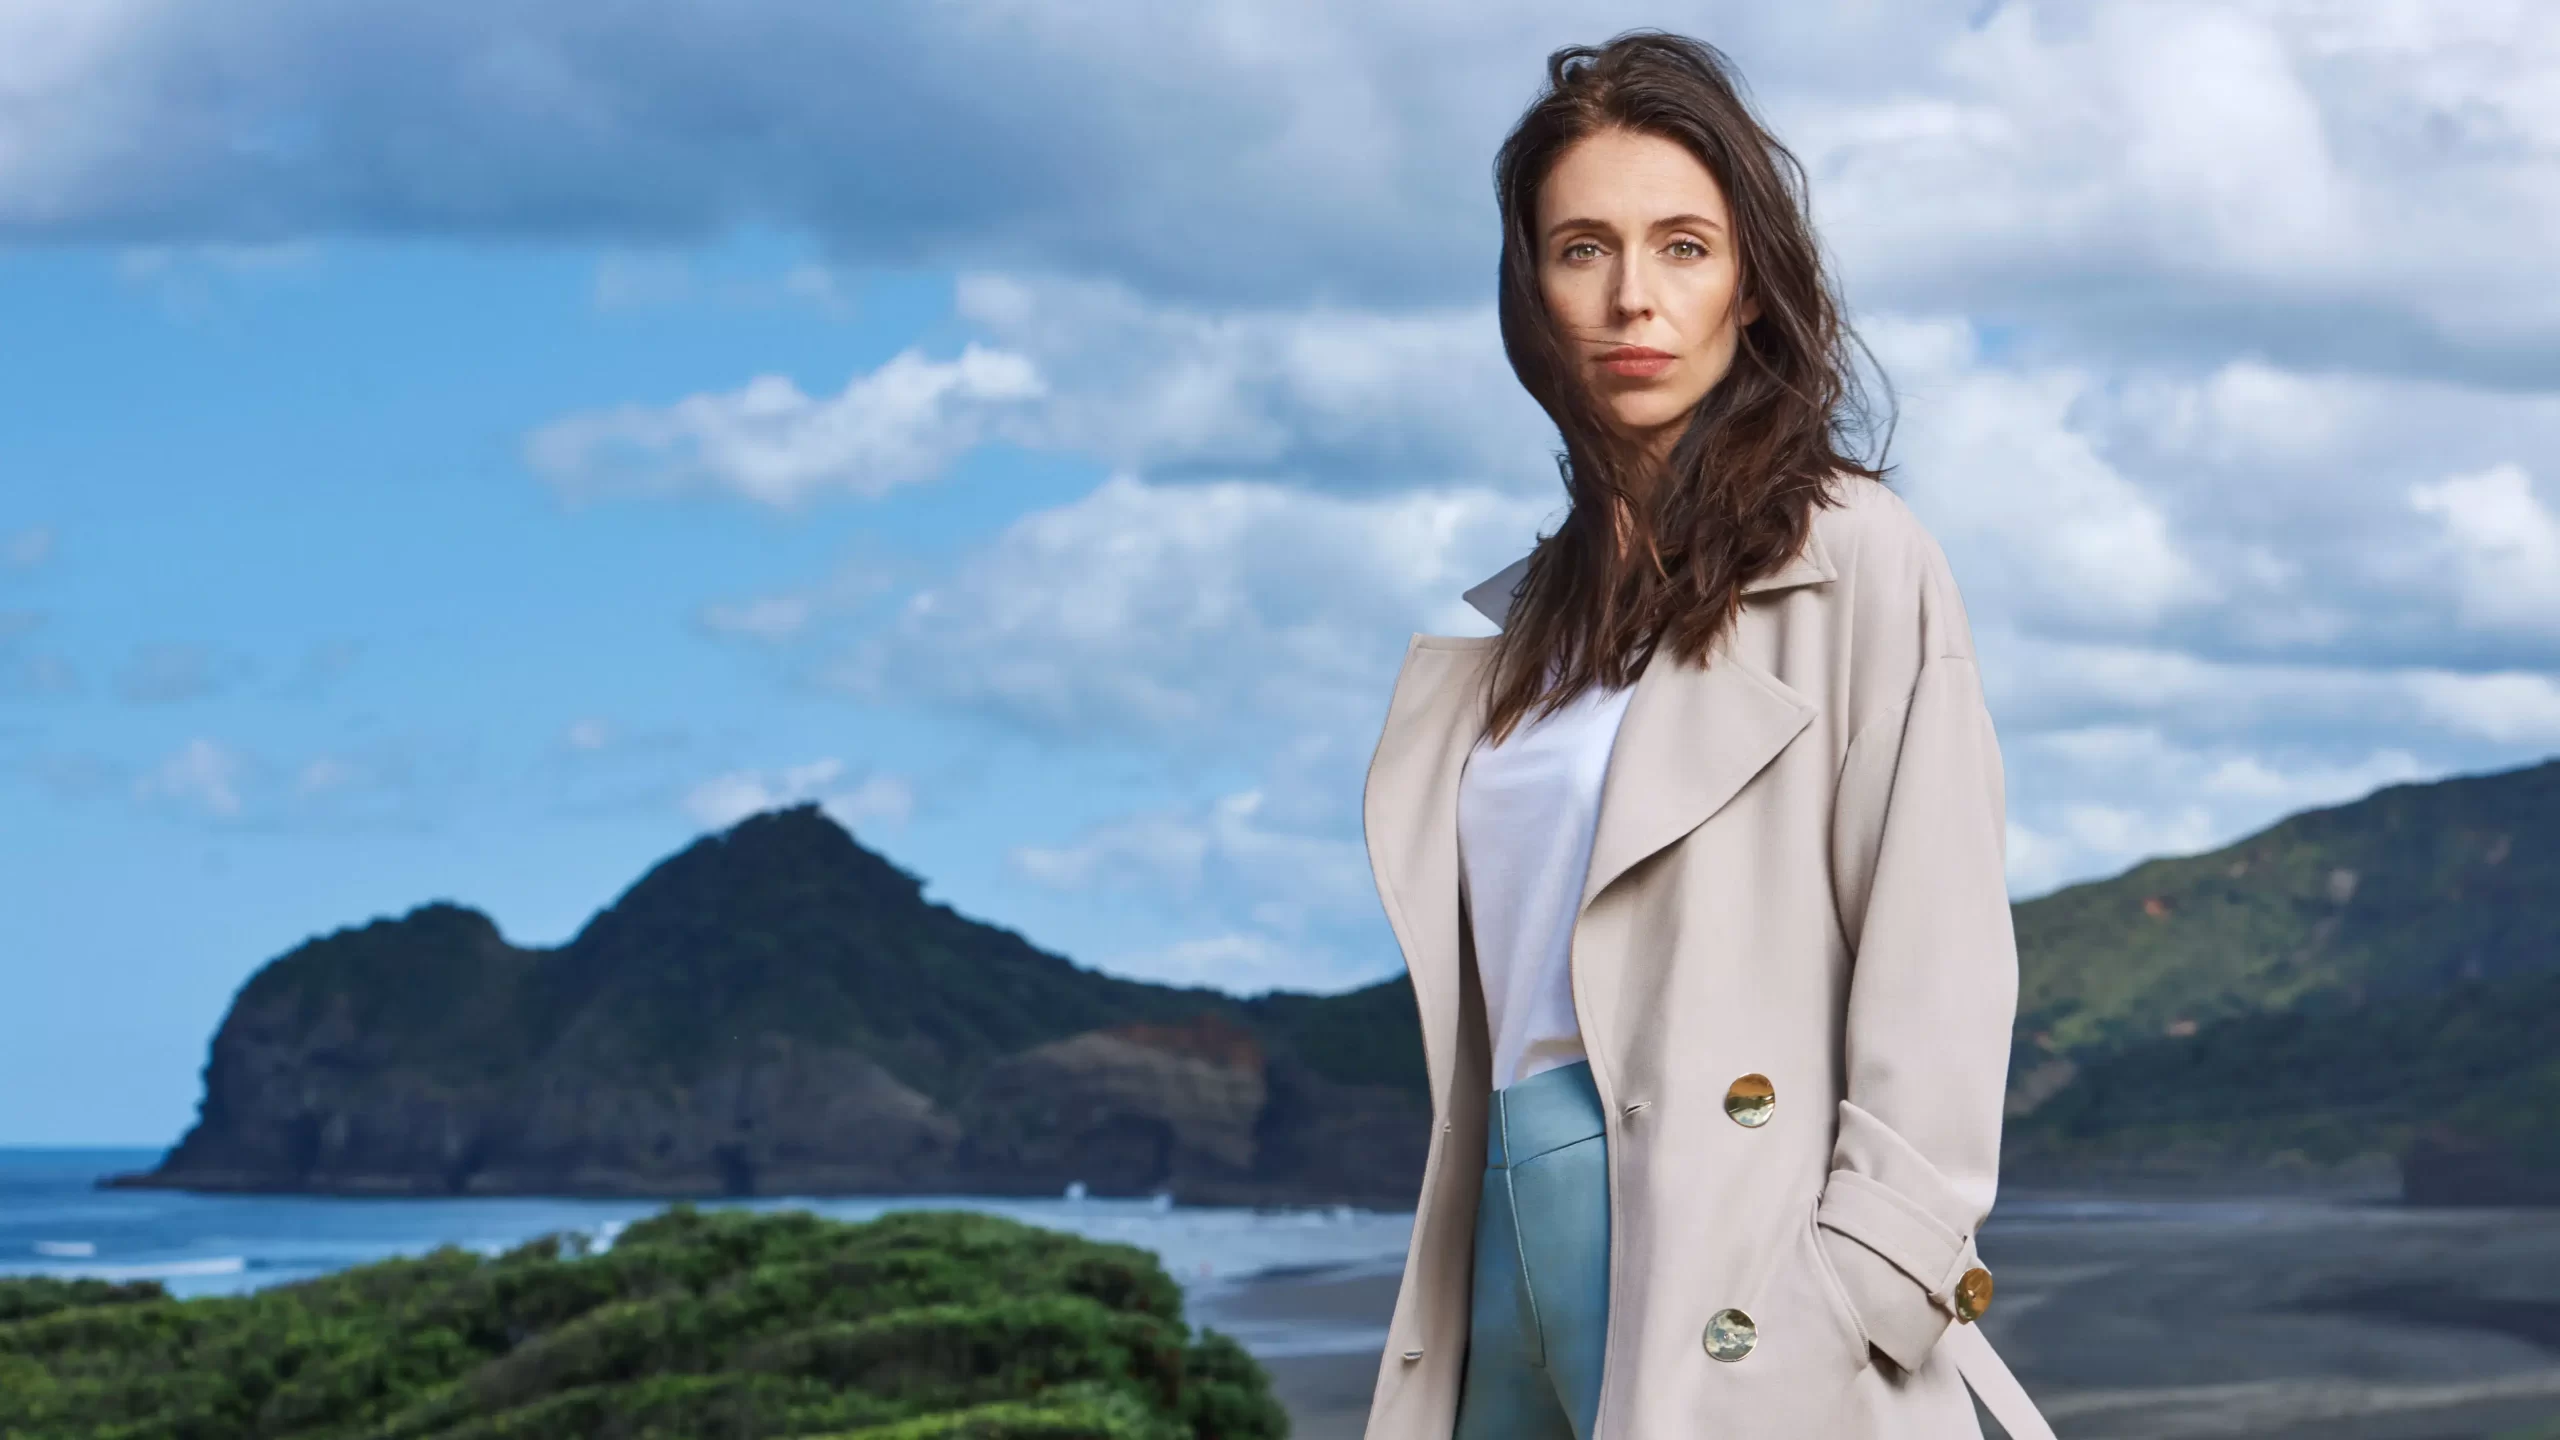 Former New Zealand Leader Jacinda Ardern Honored as Dame for Service to the Nation